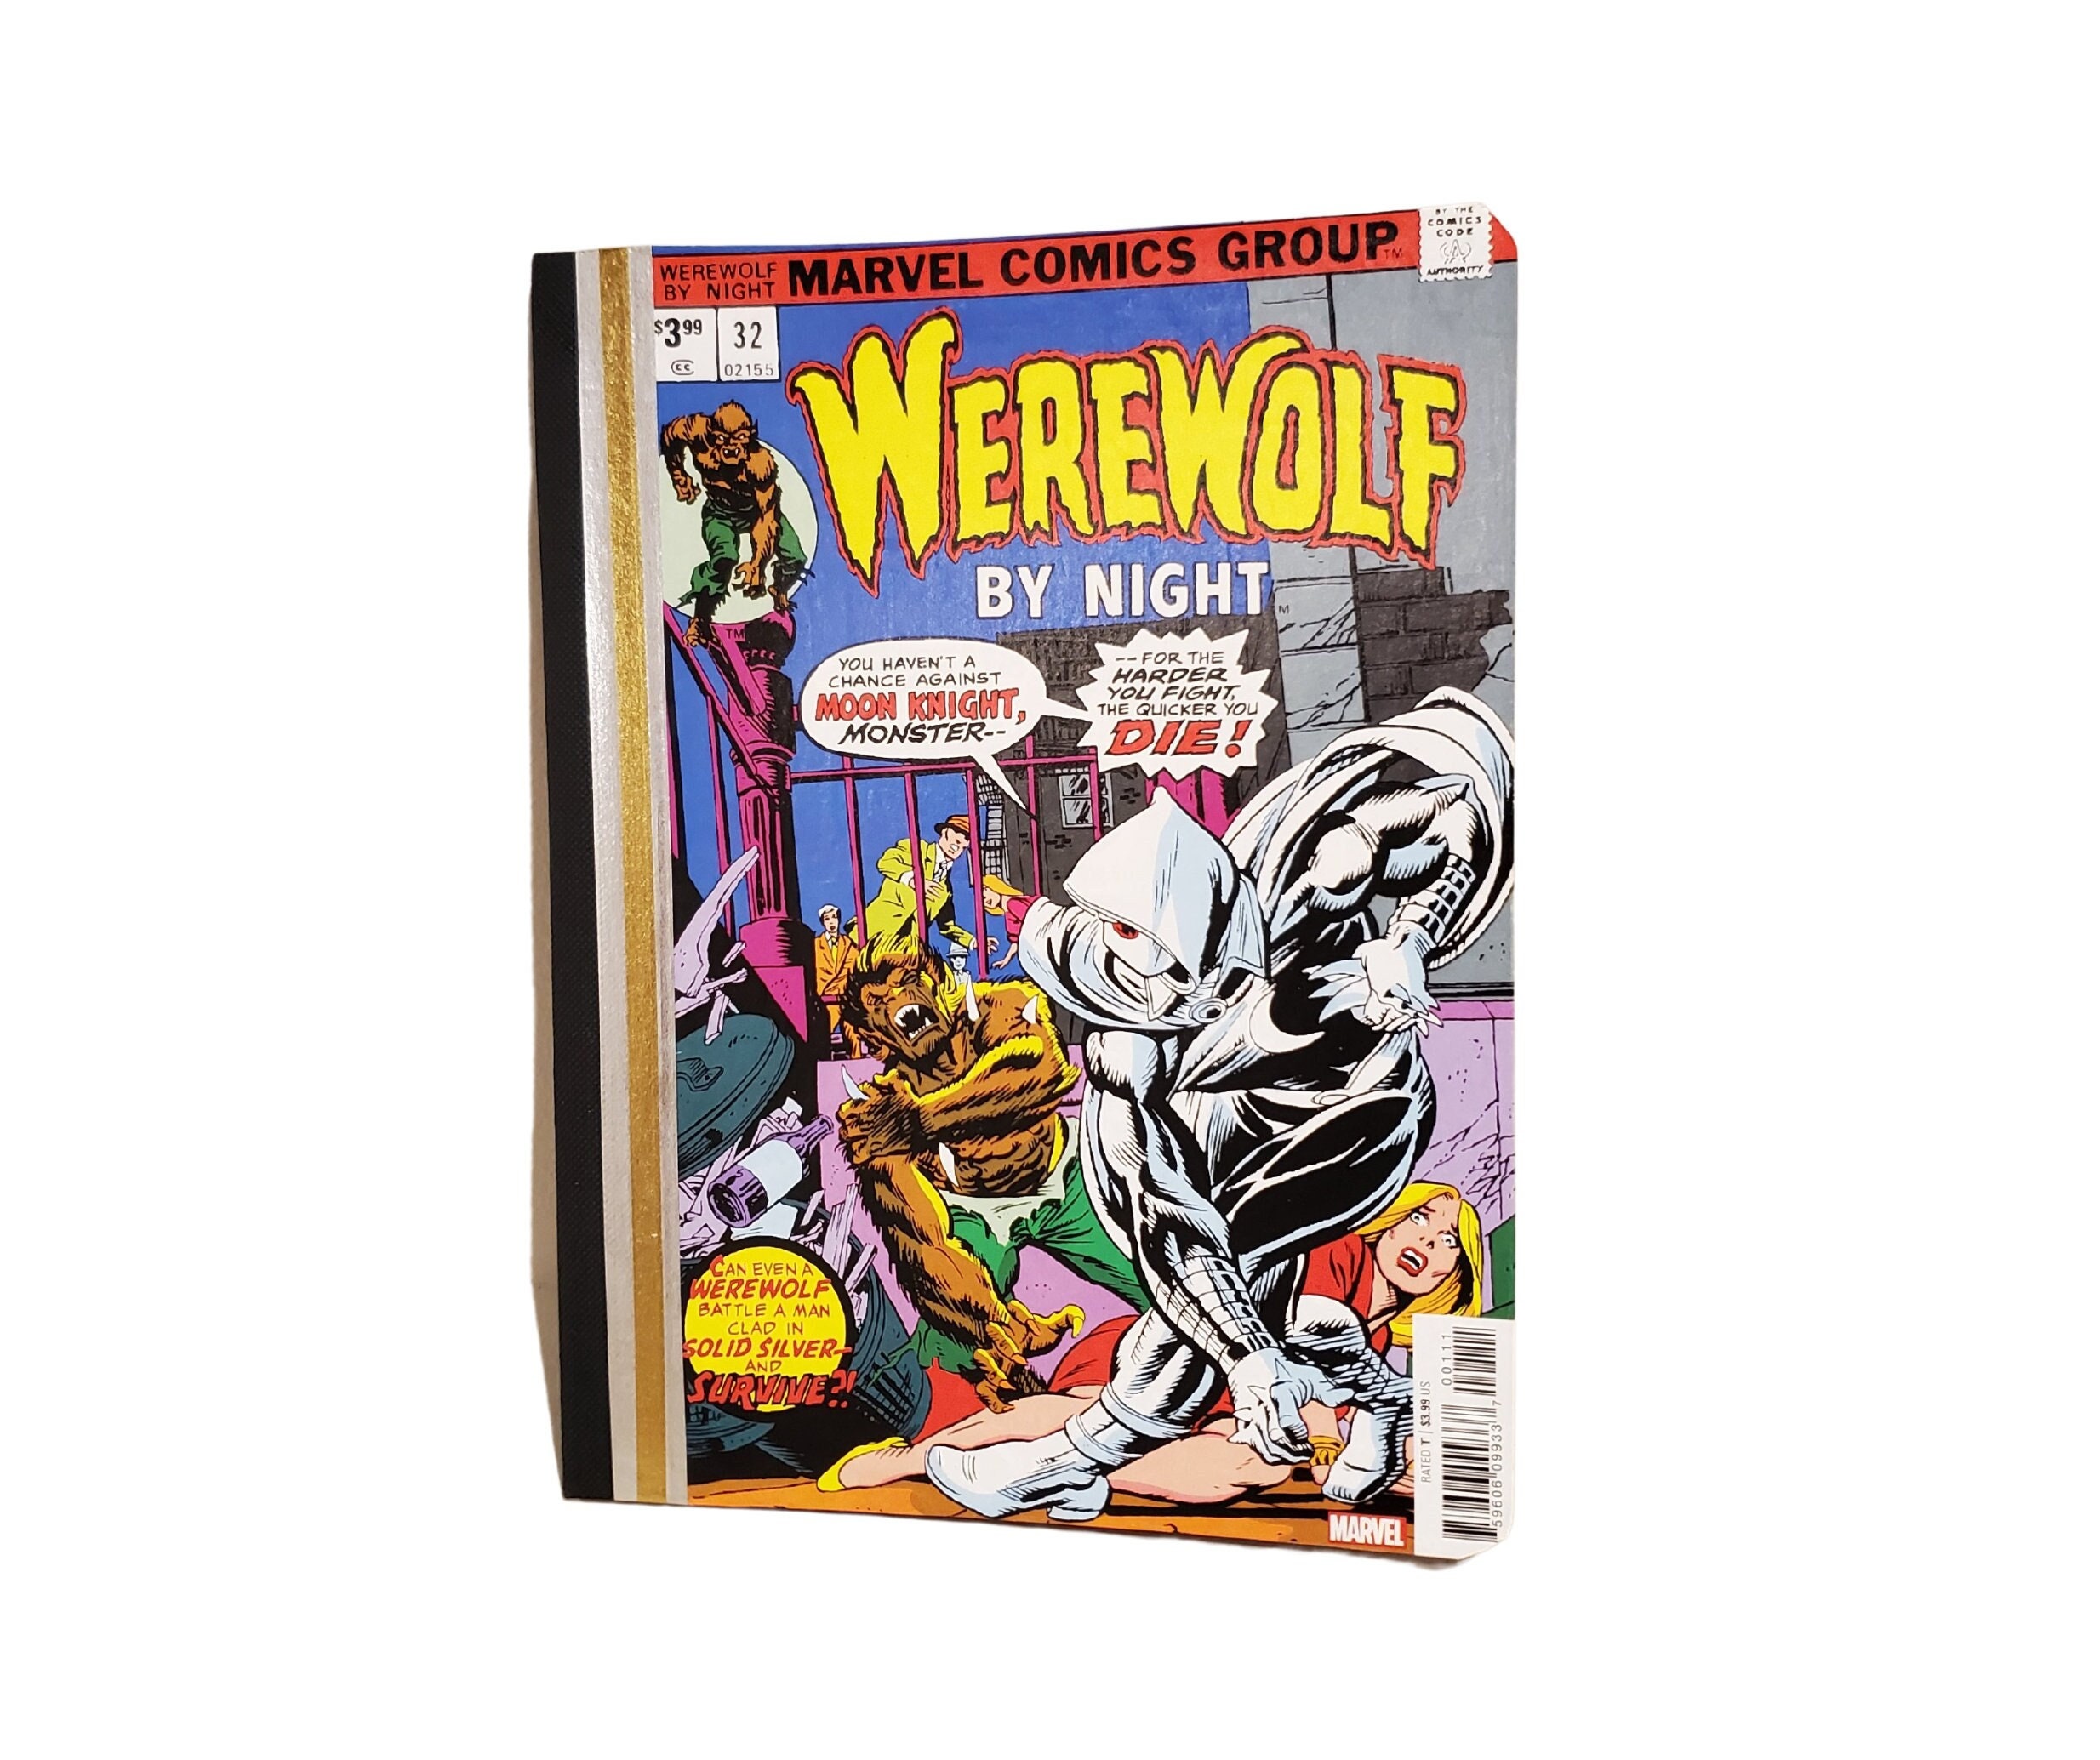 Werewolf By Night Full Moon Poster Black N White by AkiTheFull on